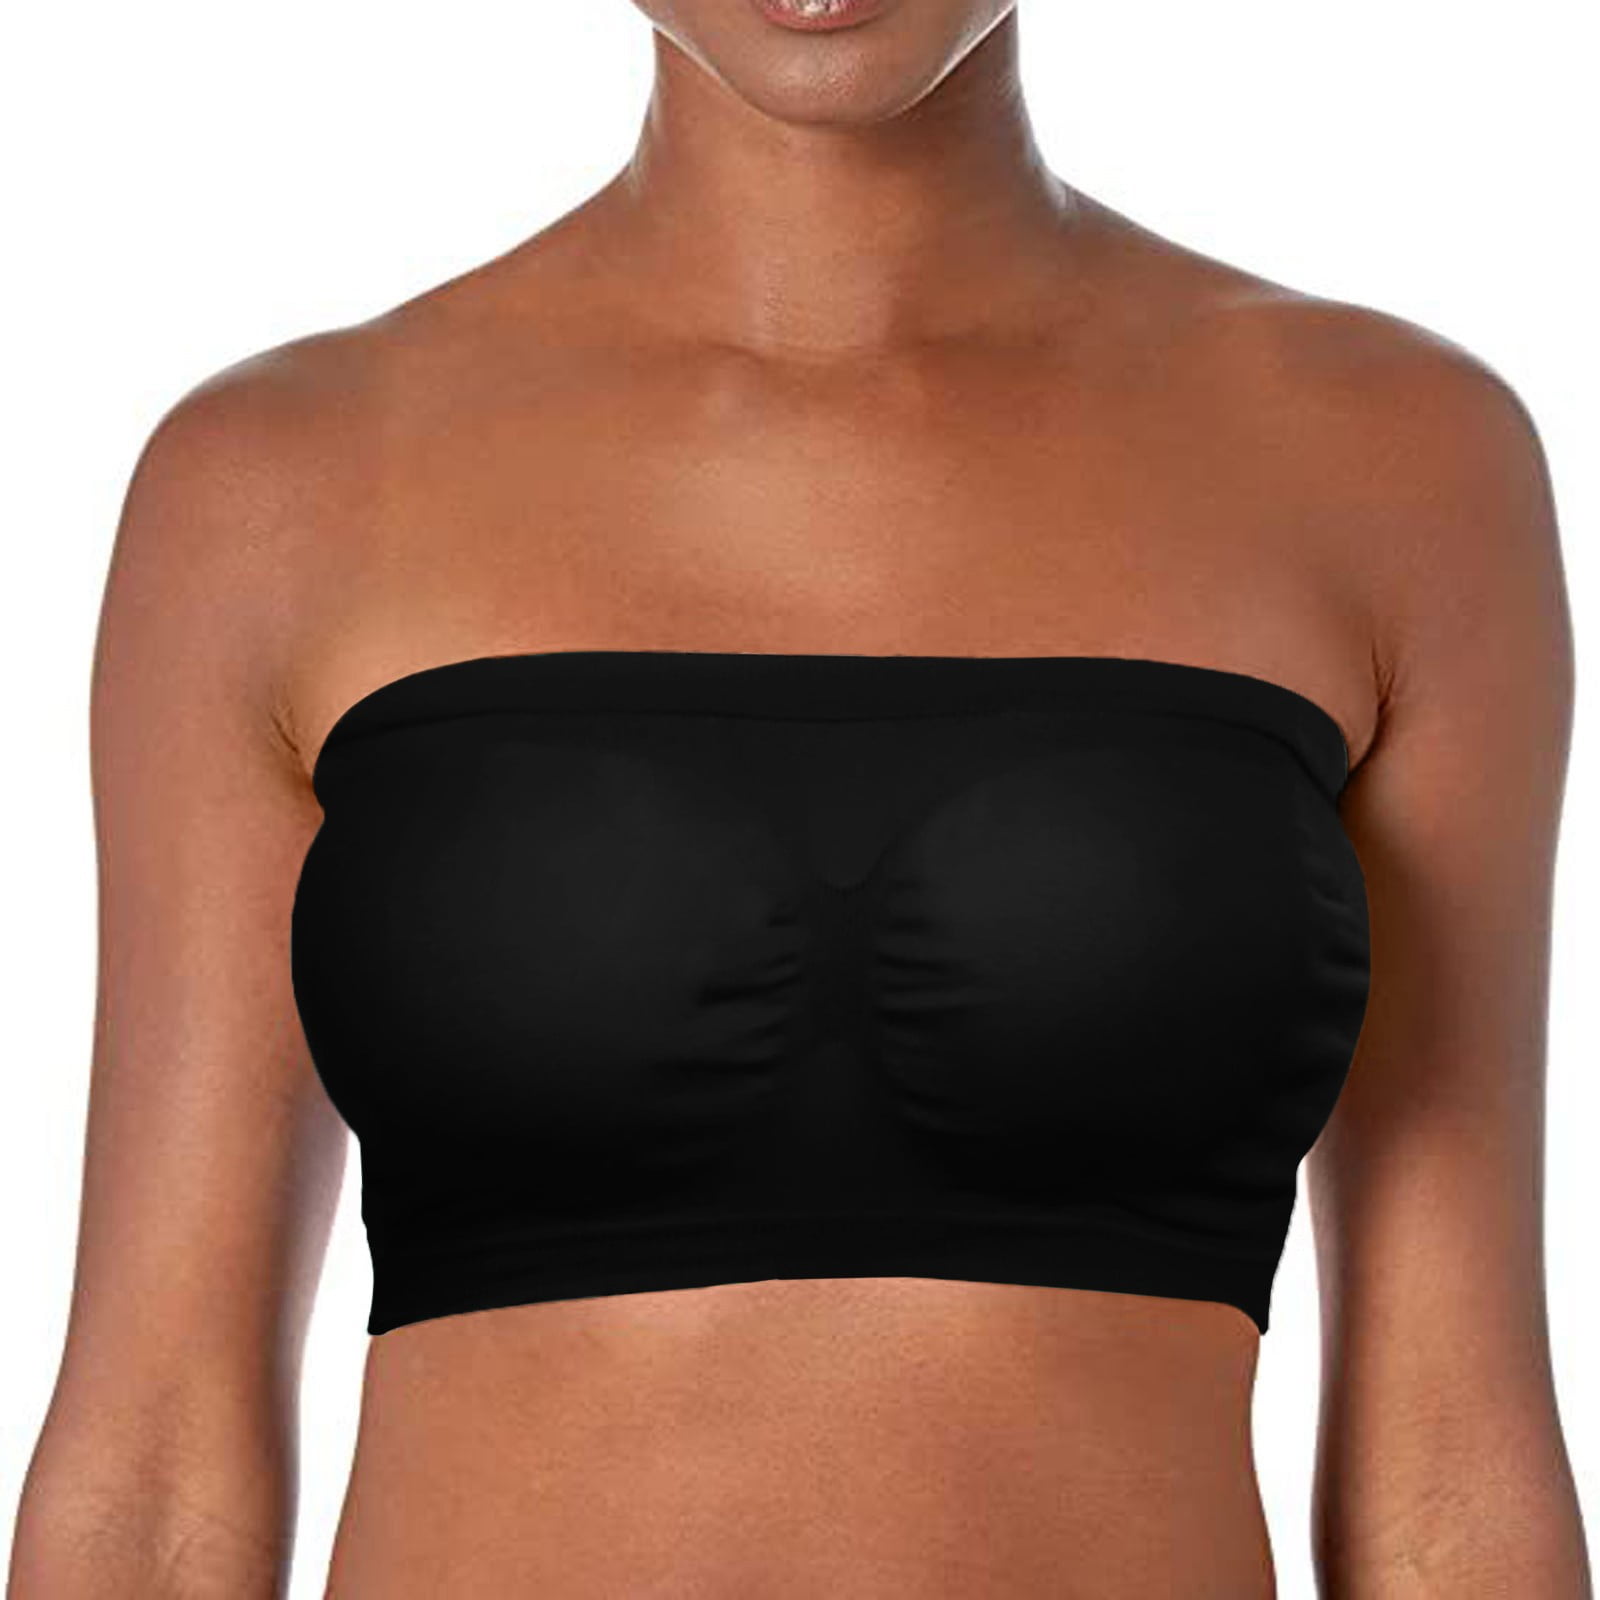  Walrus and Fish Women's Strapless Bandeau Bra Tube